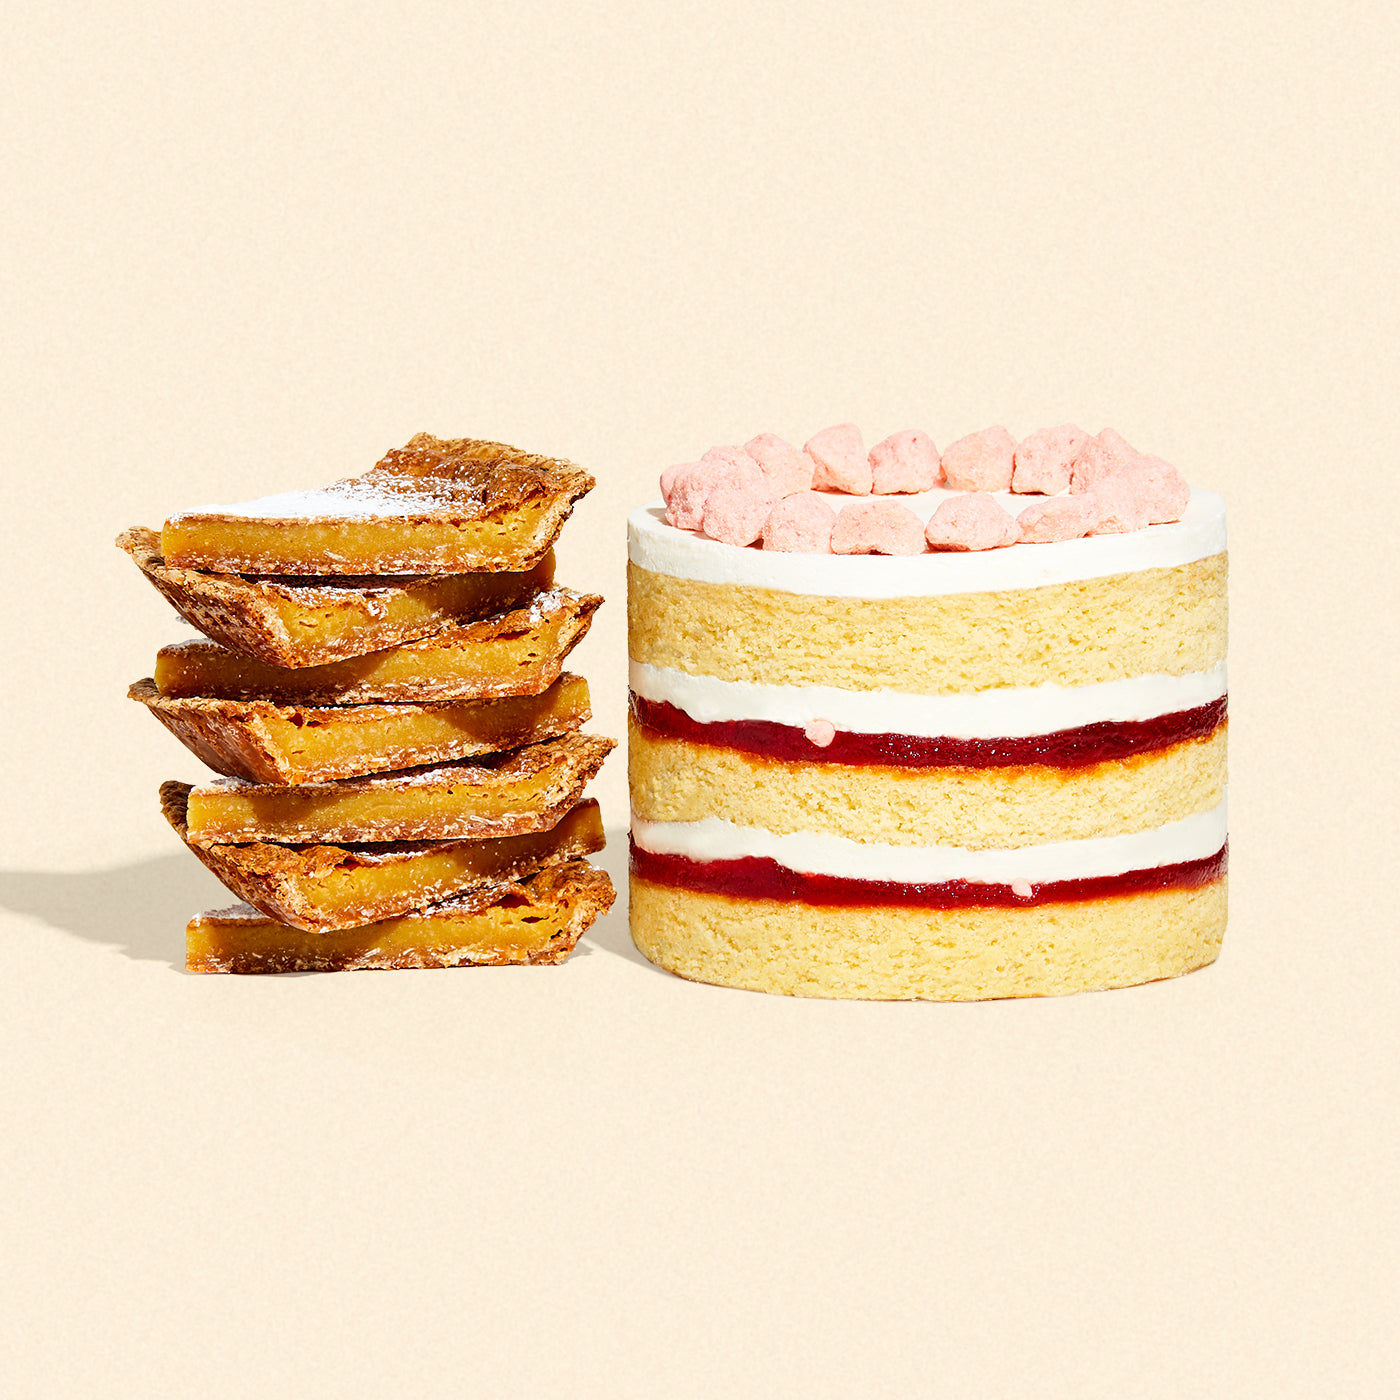 A whole 6 inch strawberry shortcake cake beside a stack of milk bar pie slices.